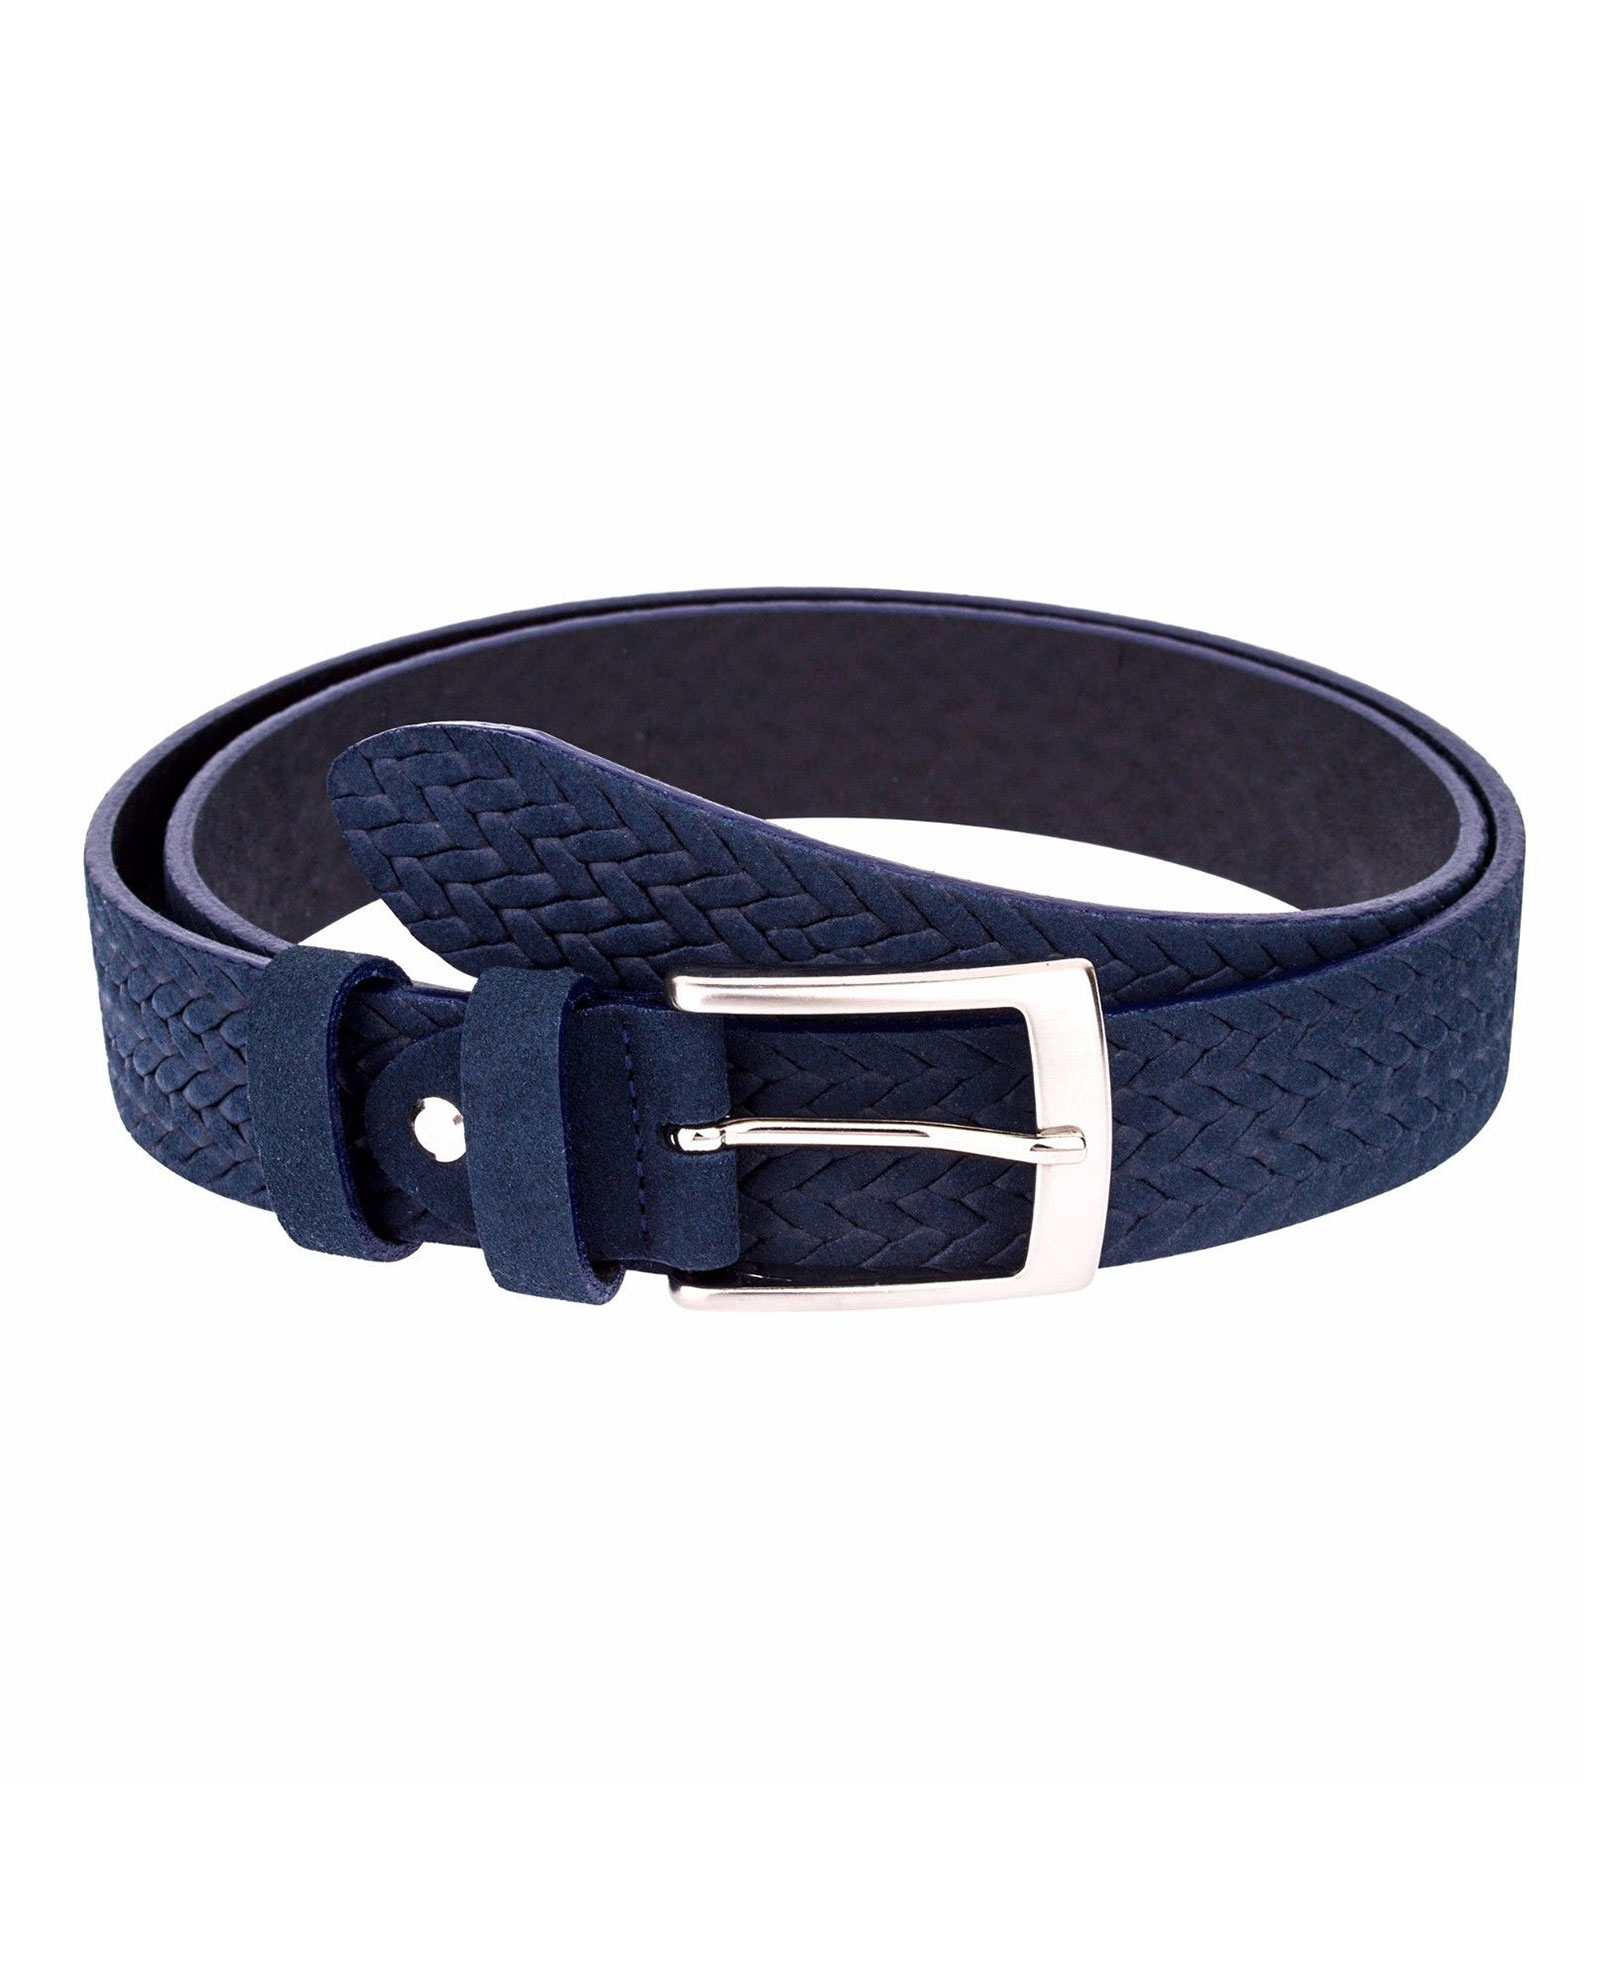 Buy Blue Suede Leather Belt | Woven Braided Emboss | Free Shipping